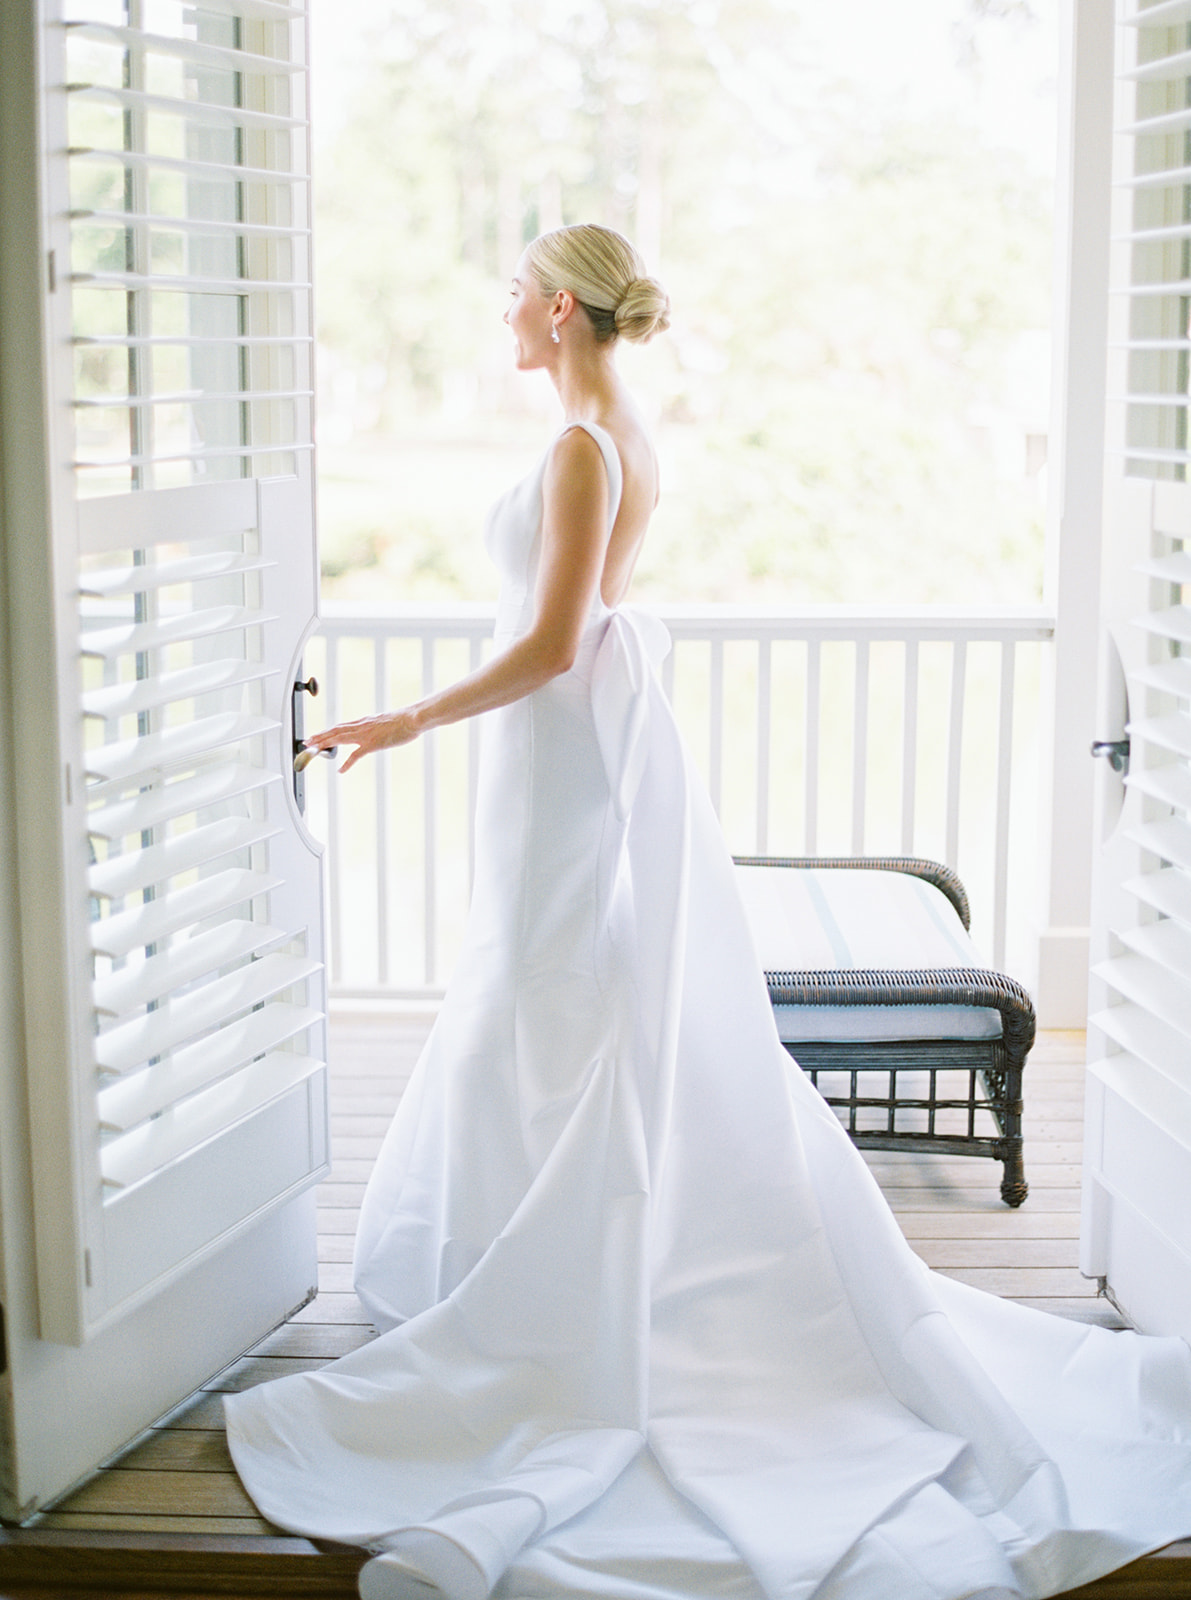 Autumn & Philip's Southern Vogue Wedding. Donning an impeccably tailored gown by Sareh Nouri, Autumn was the picture of grace in the gorgeous "Ren," complete with a statement bow, and the perfect "90's Vogue-inspired" hair and makeup.